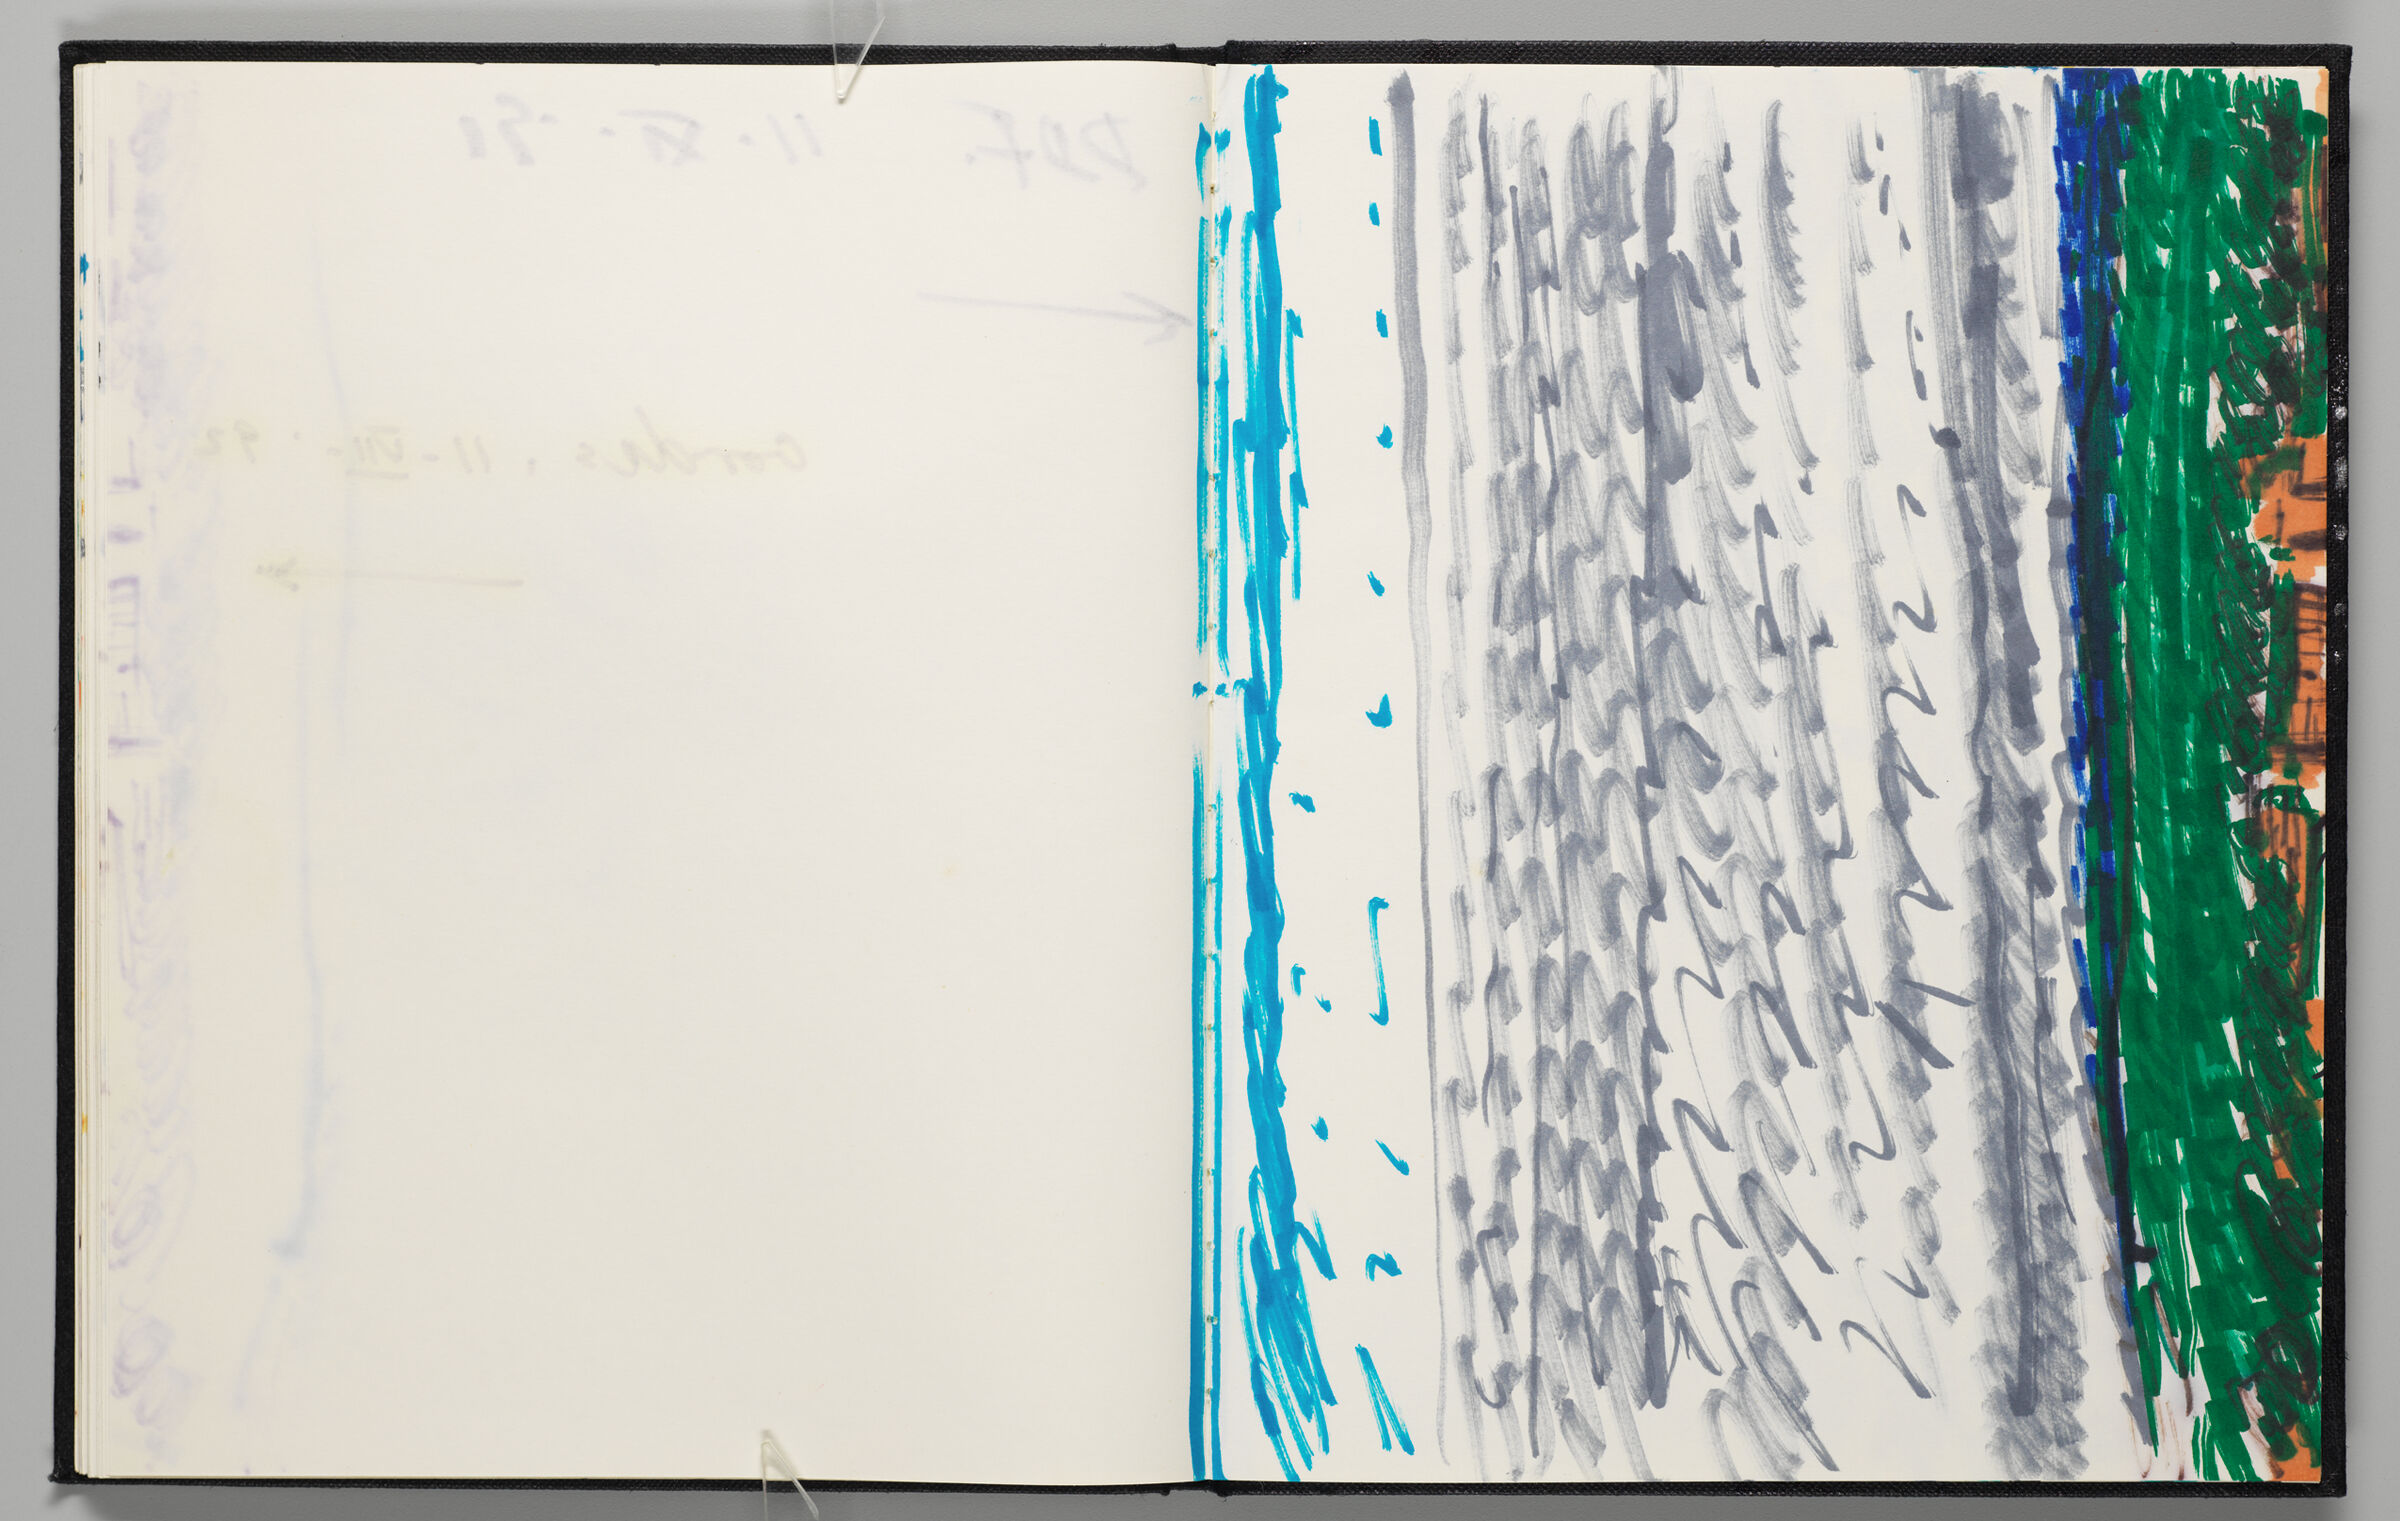 Untitled (Bleed-Through Of Previous Page, Left Page); Untitled (Gordes Landscape, Right Page)